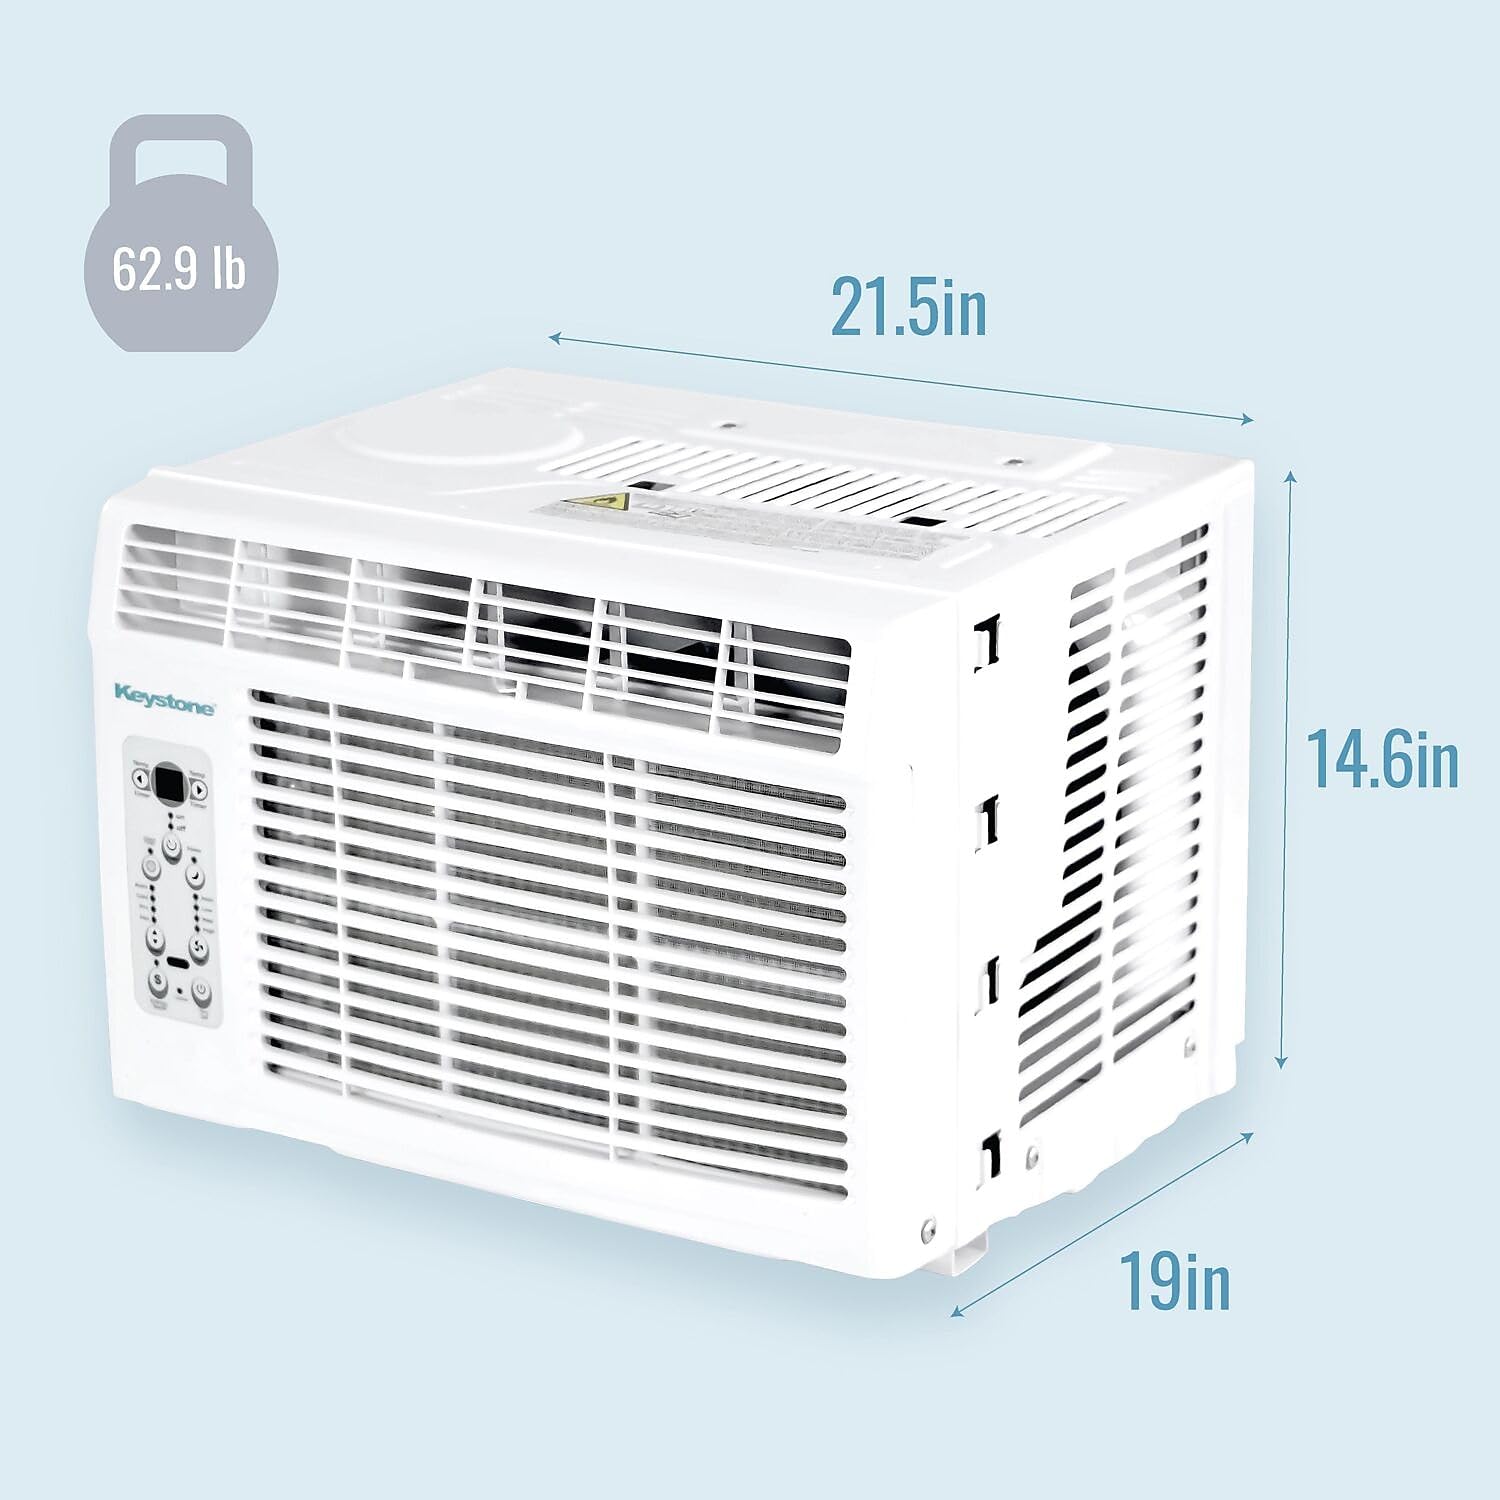 Keystone LCD, KSTAW10CE 10,000 BTU Window Mounted Air Conditioner Star Rating, Follow Me Remote Control, Energy Saver, Sleep Mode, Timer, and Auto-Restart, 10000, White